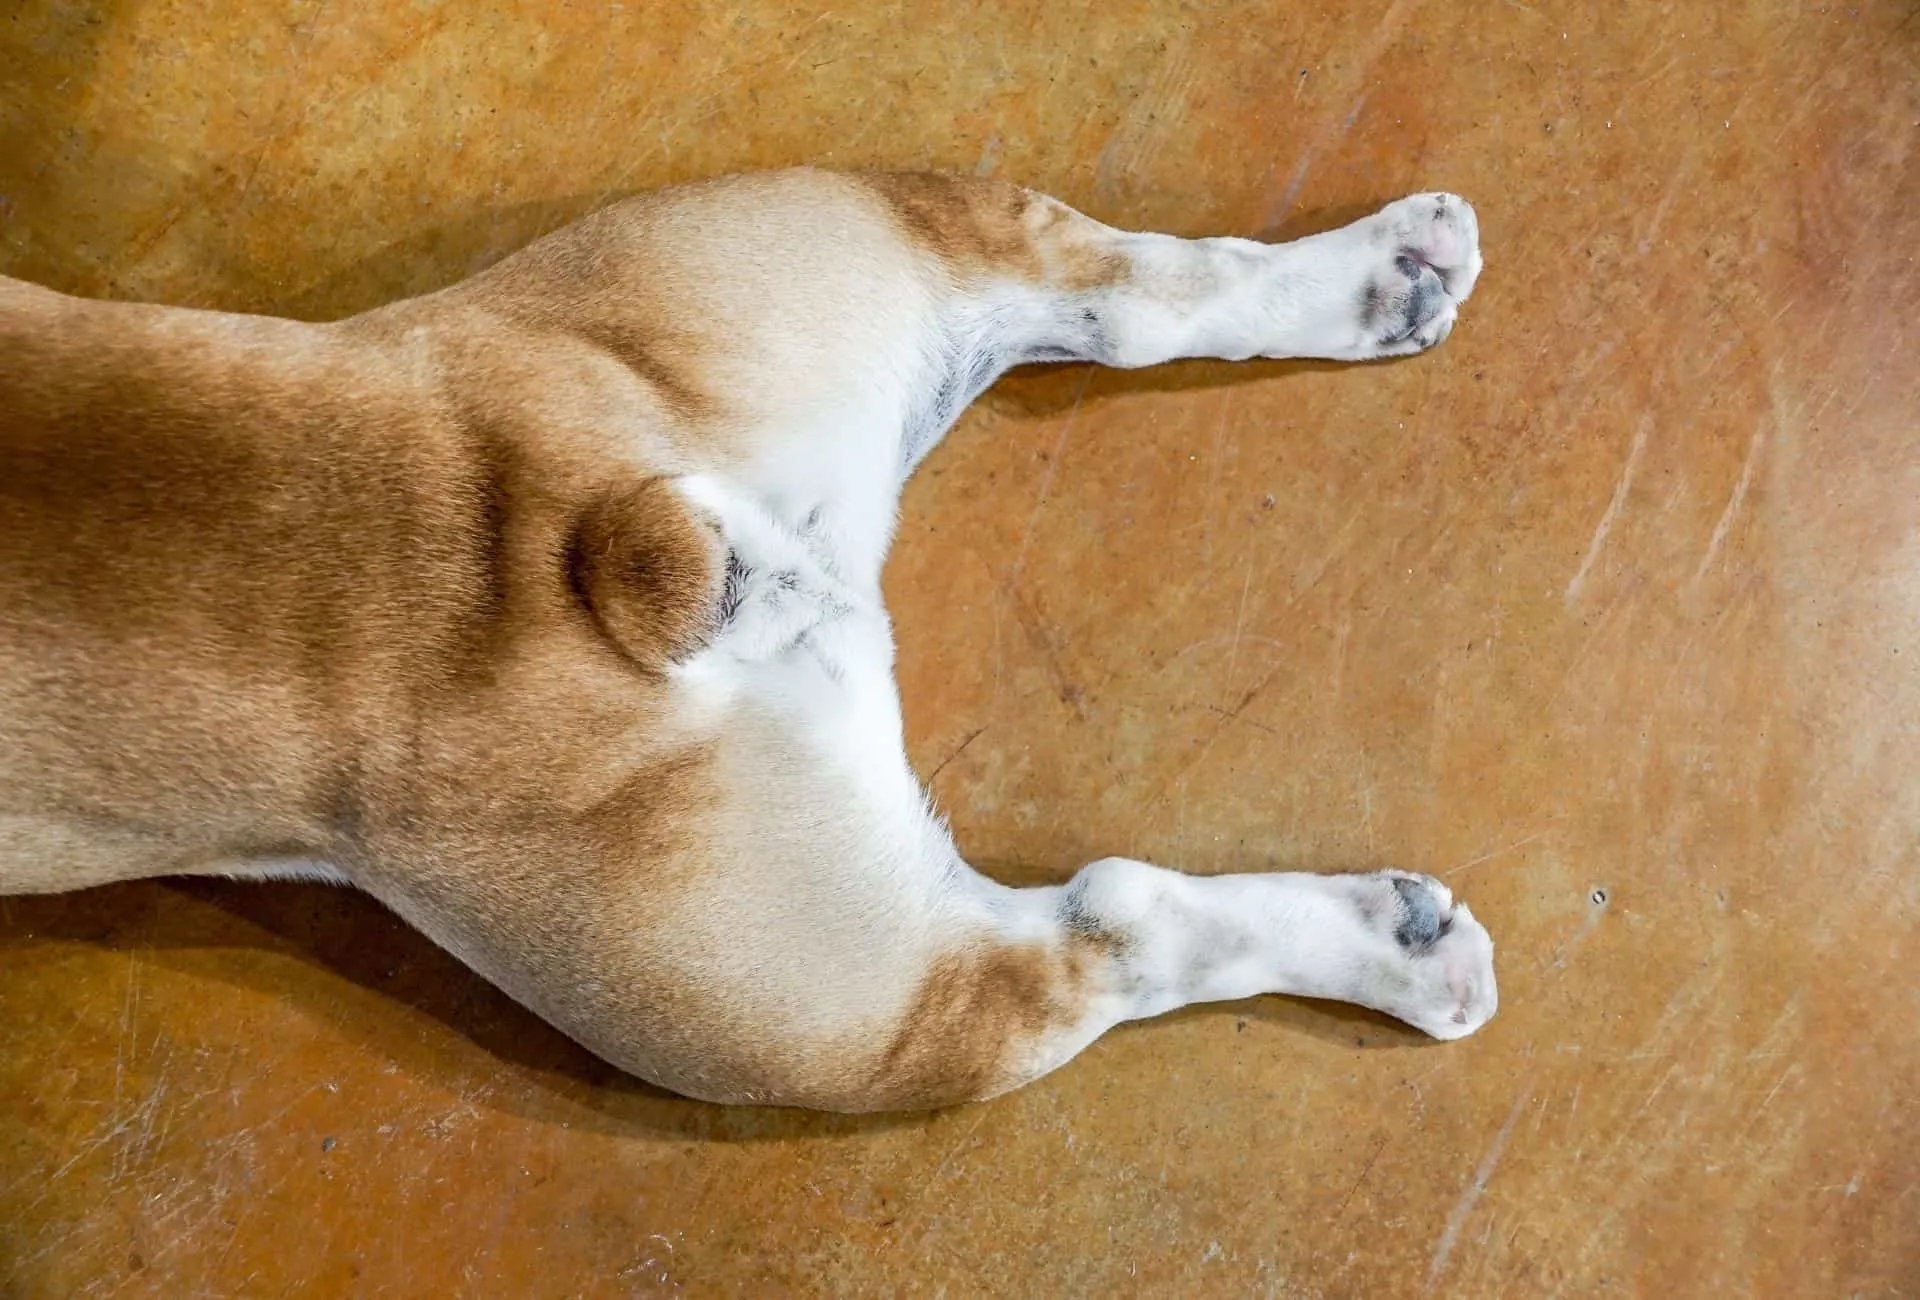 The rear end of a pug lying flat on the floor with the hind legs stretched.